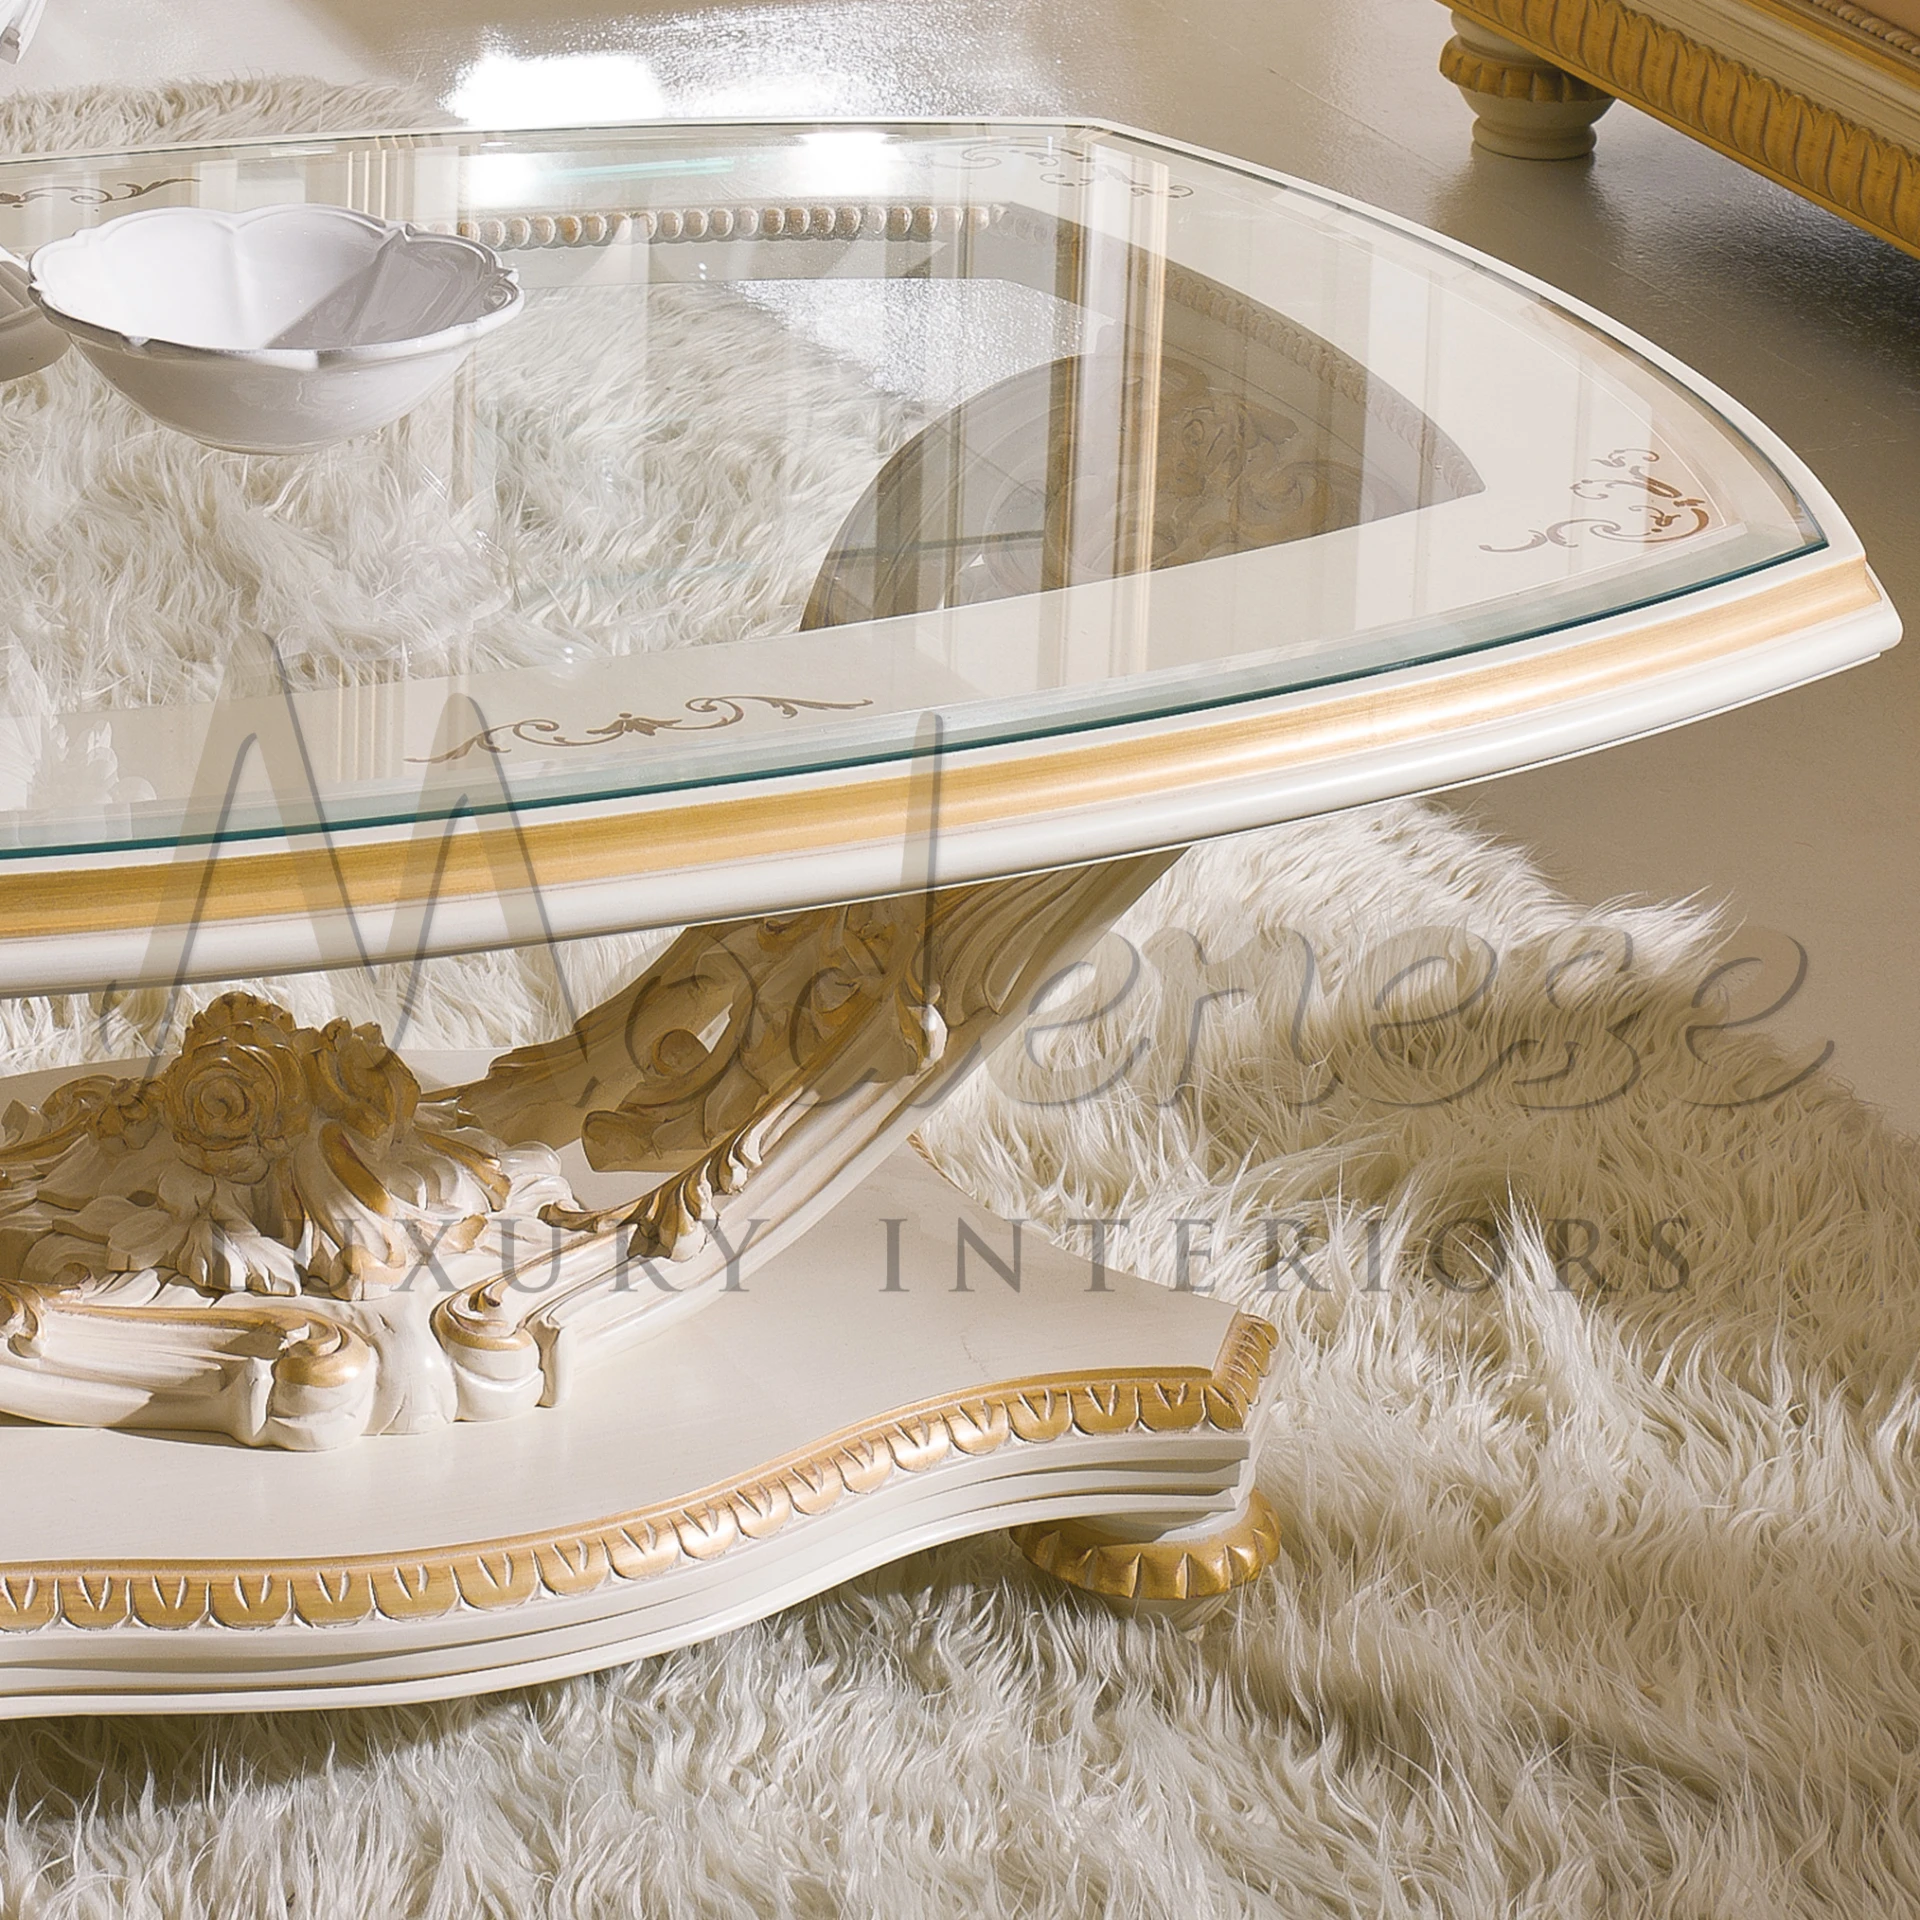 Elegant oval coffee table, blending past charm with modern luxury.